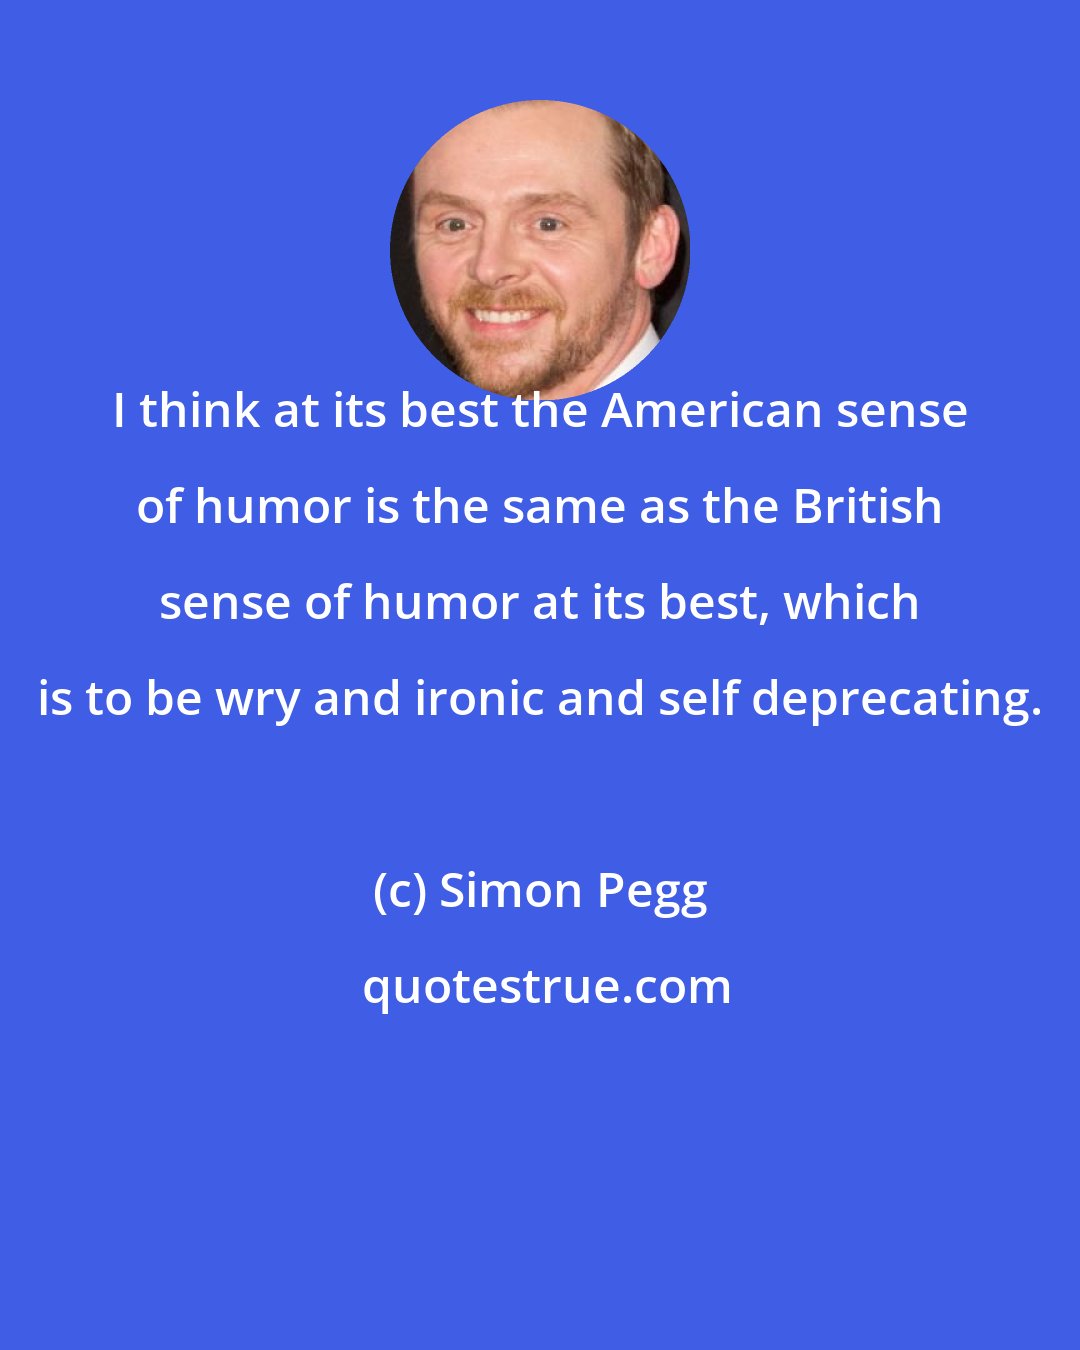 Simon Pegg: I think at its best the American sense of humor is the same as the British sense of humor at its best, which is to be wry and ironic and self deprecating.